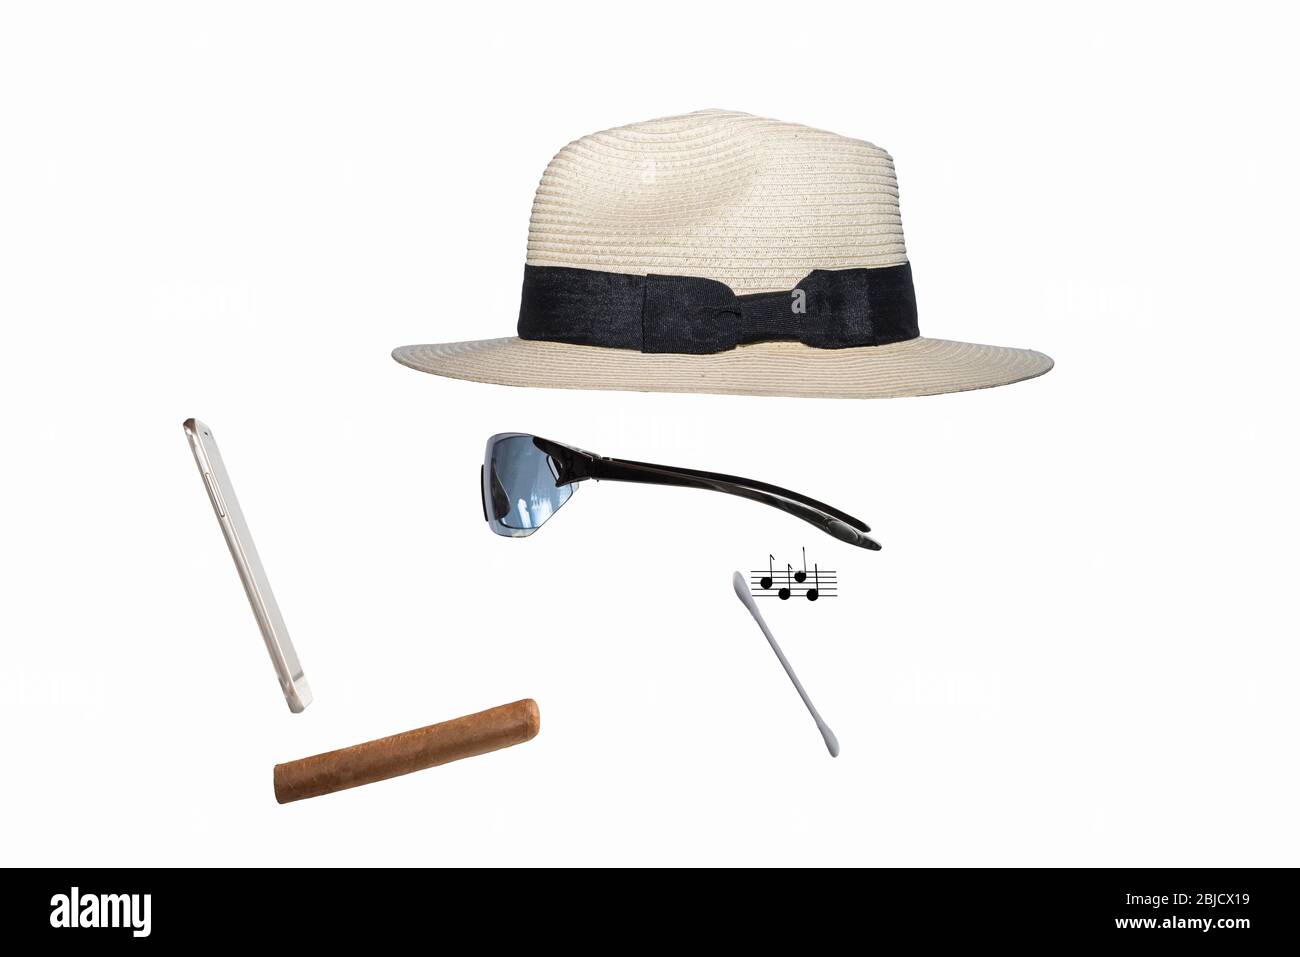 Panama hat, sun glasses, mobile phone, cigar & earbud + typed musical notes. Concept: invisible man, Modern man, fashion, streaming, modern earphones. Stock Photo